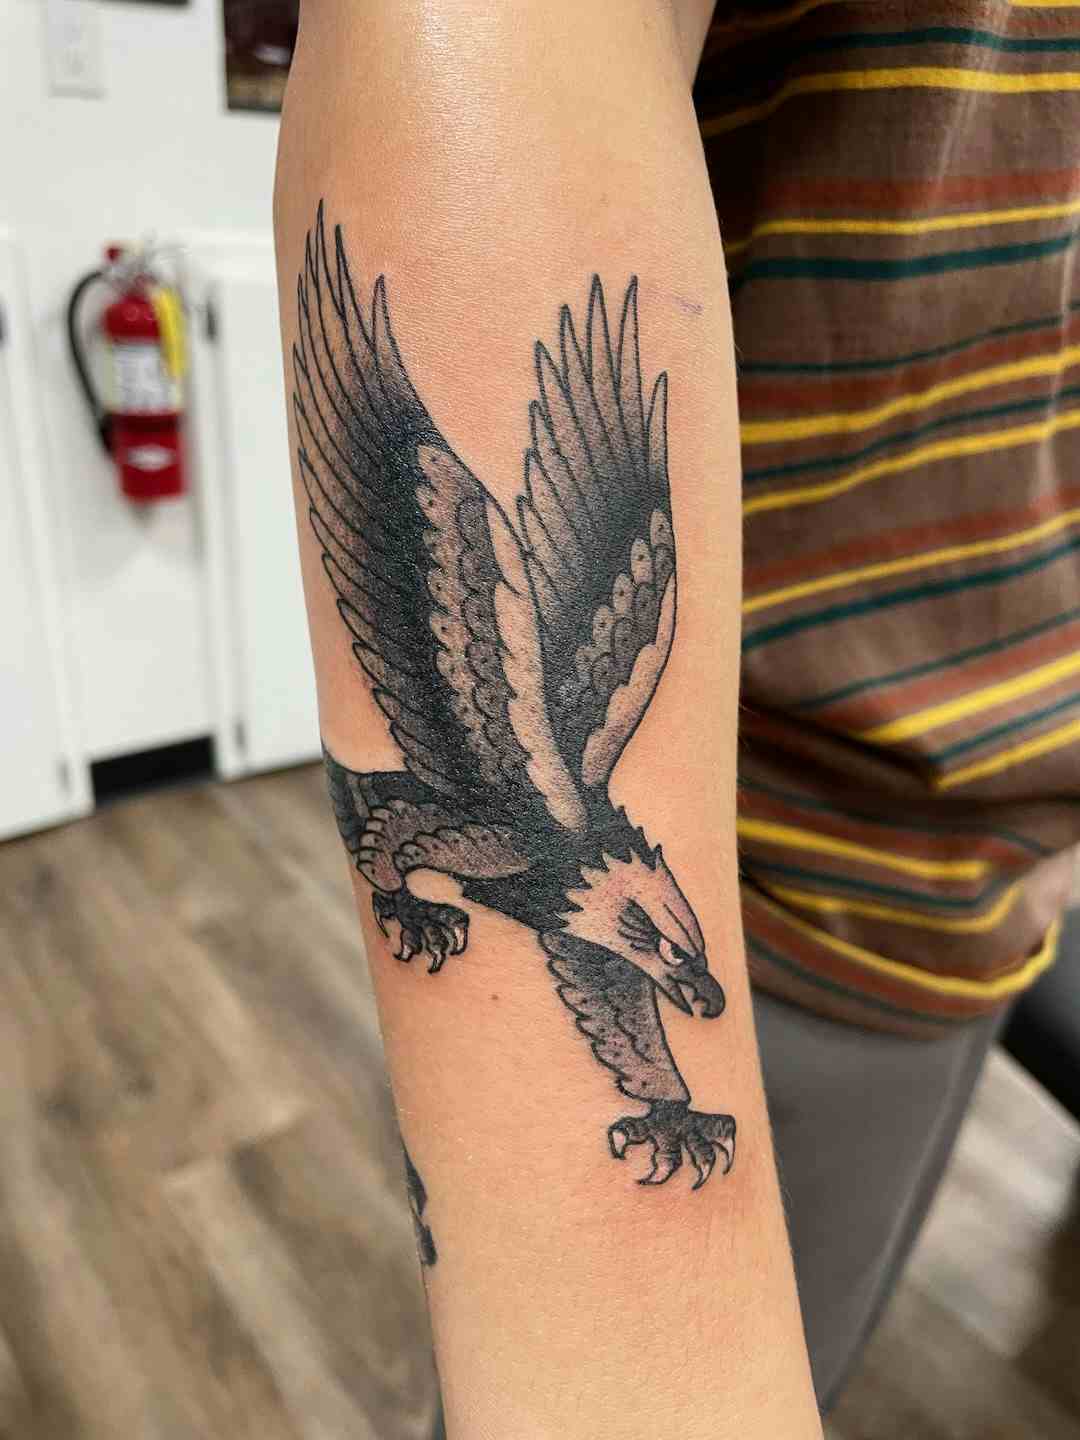 Traditional flying eagle tattoo